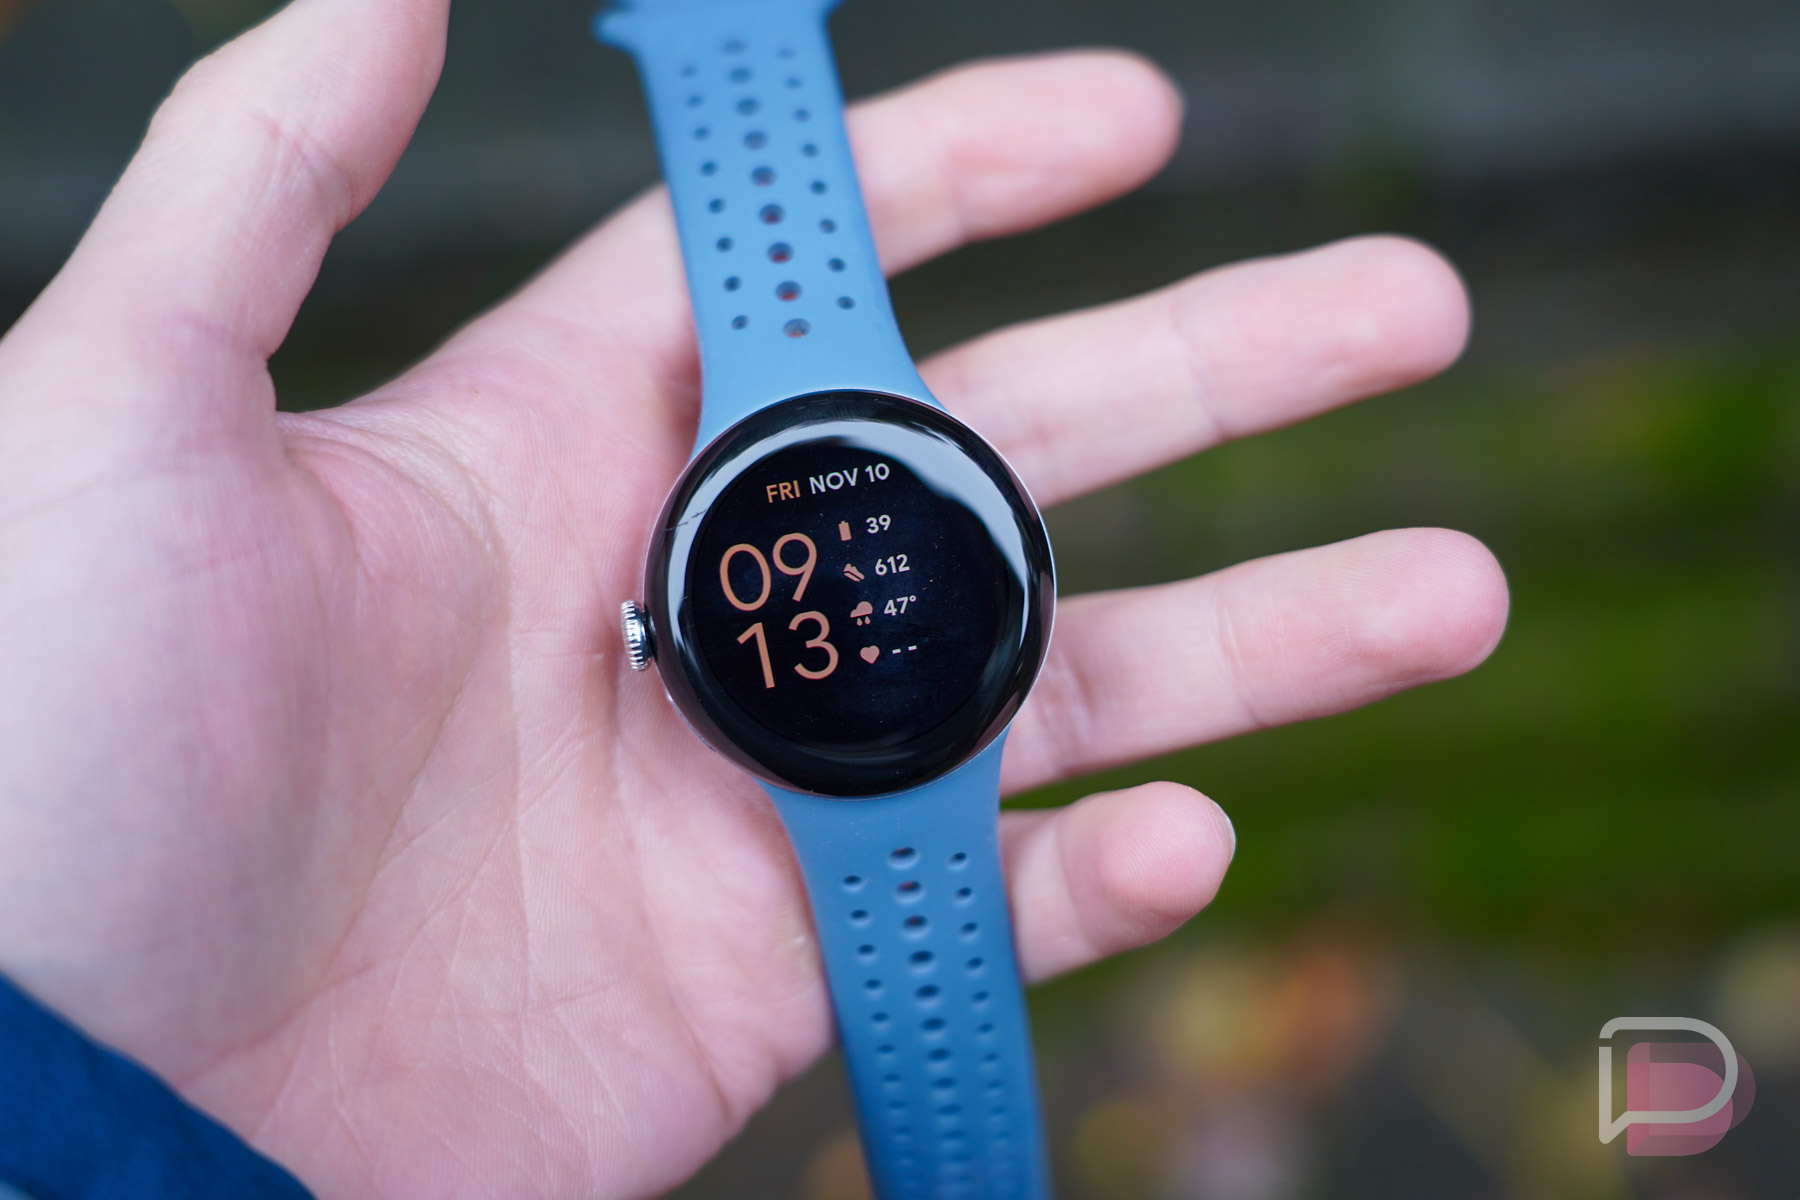 Google Pixel Watch 2 LTE vs Pixel Watch 2 Wi-Fi: What's the difference?